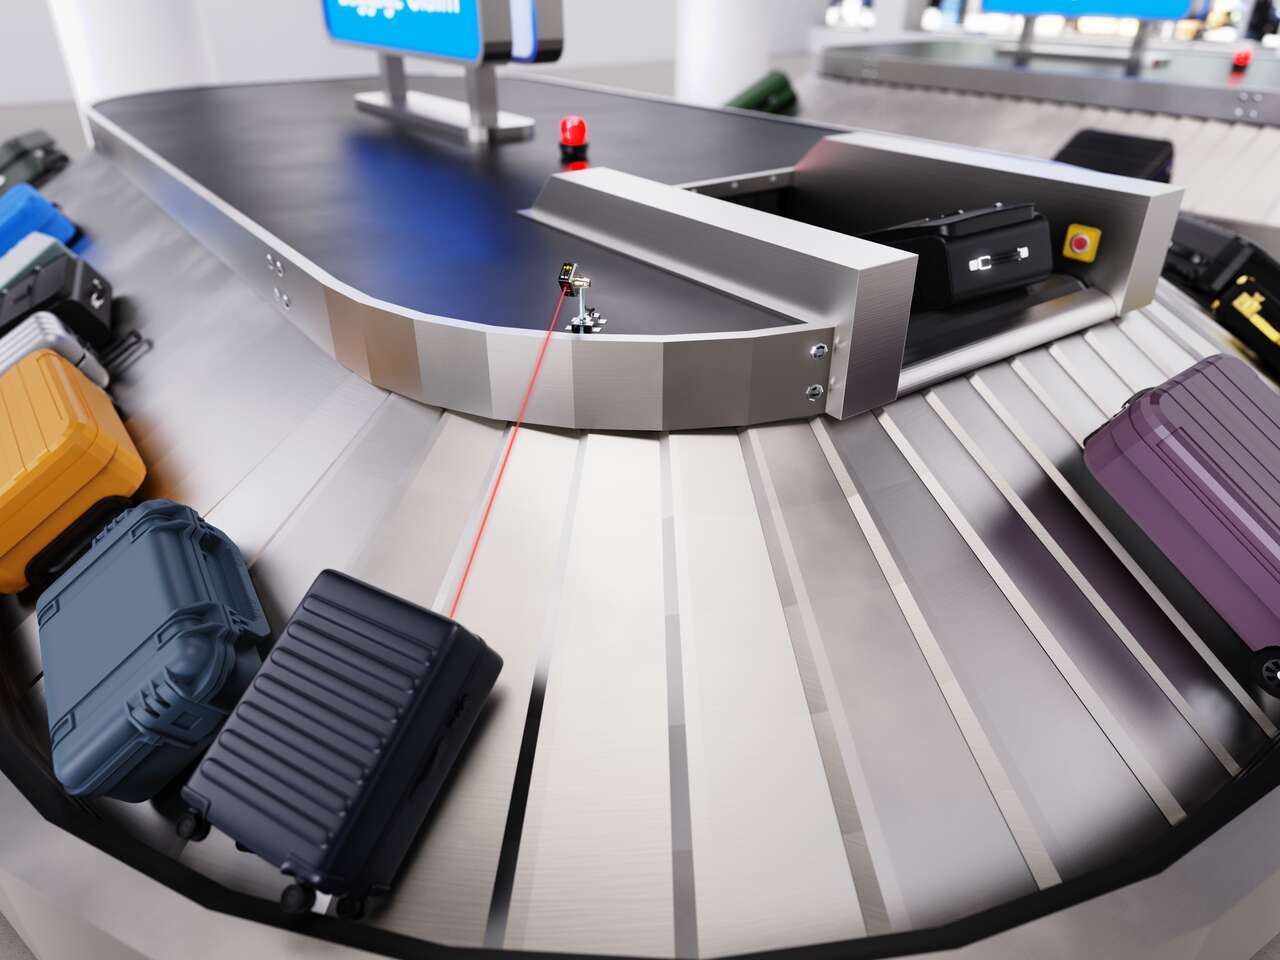 Preventing Jams in Airport Baggage Retrieval Systems